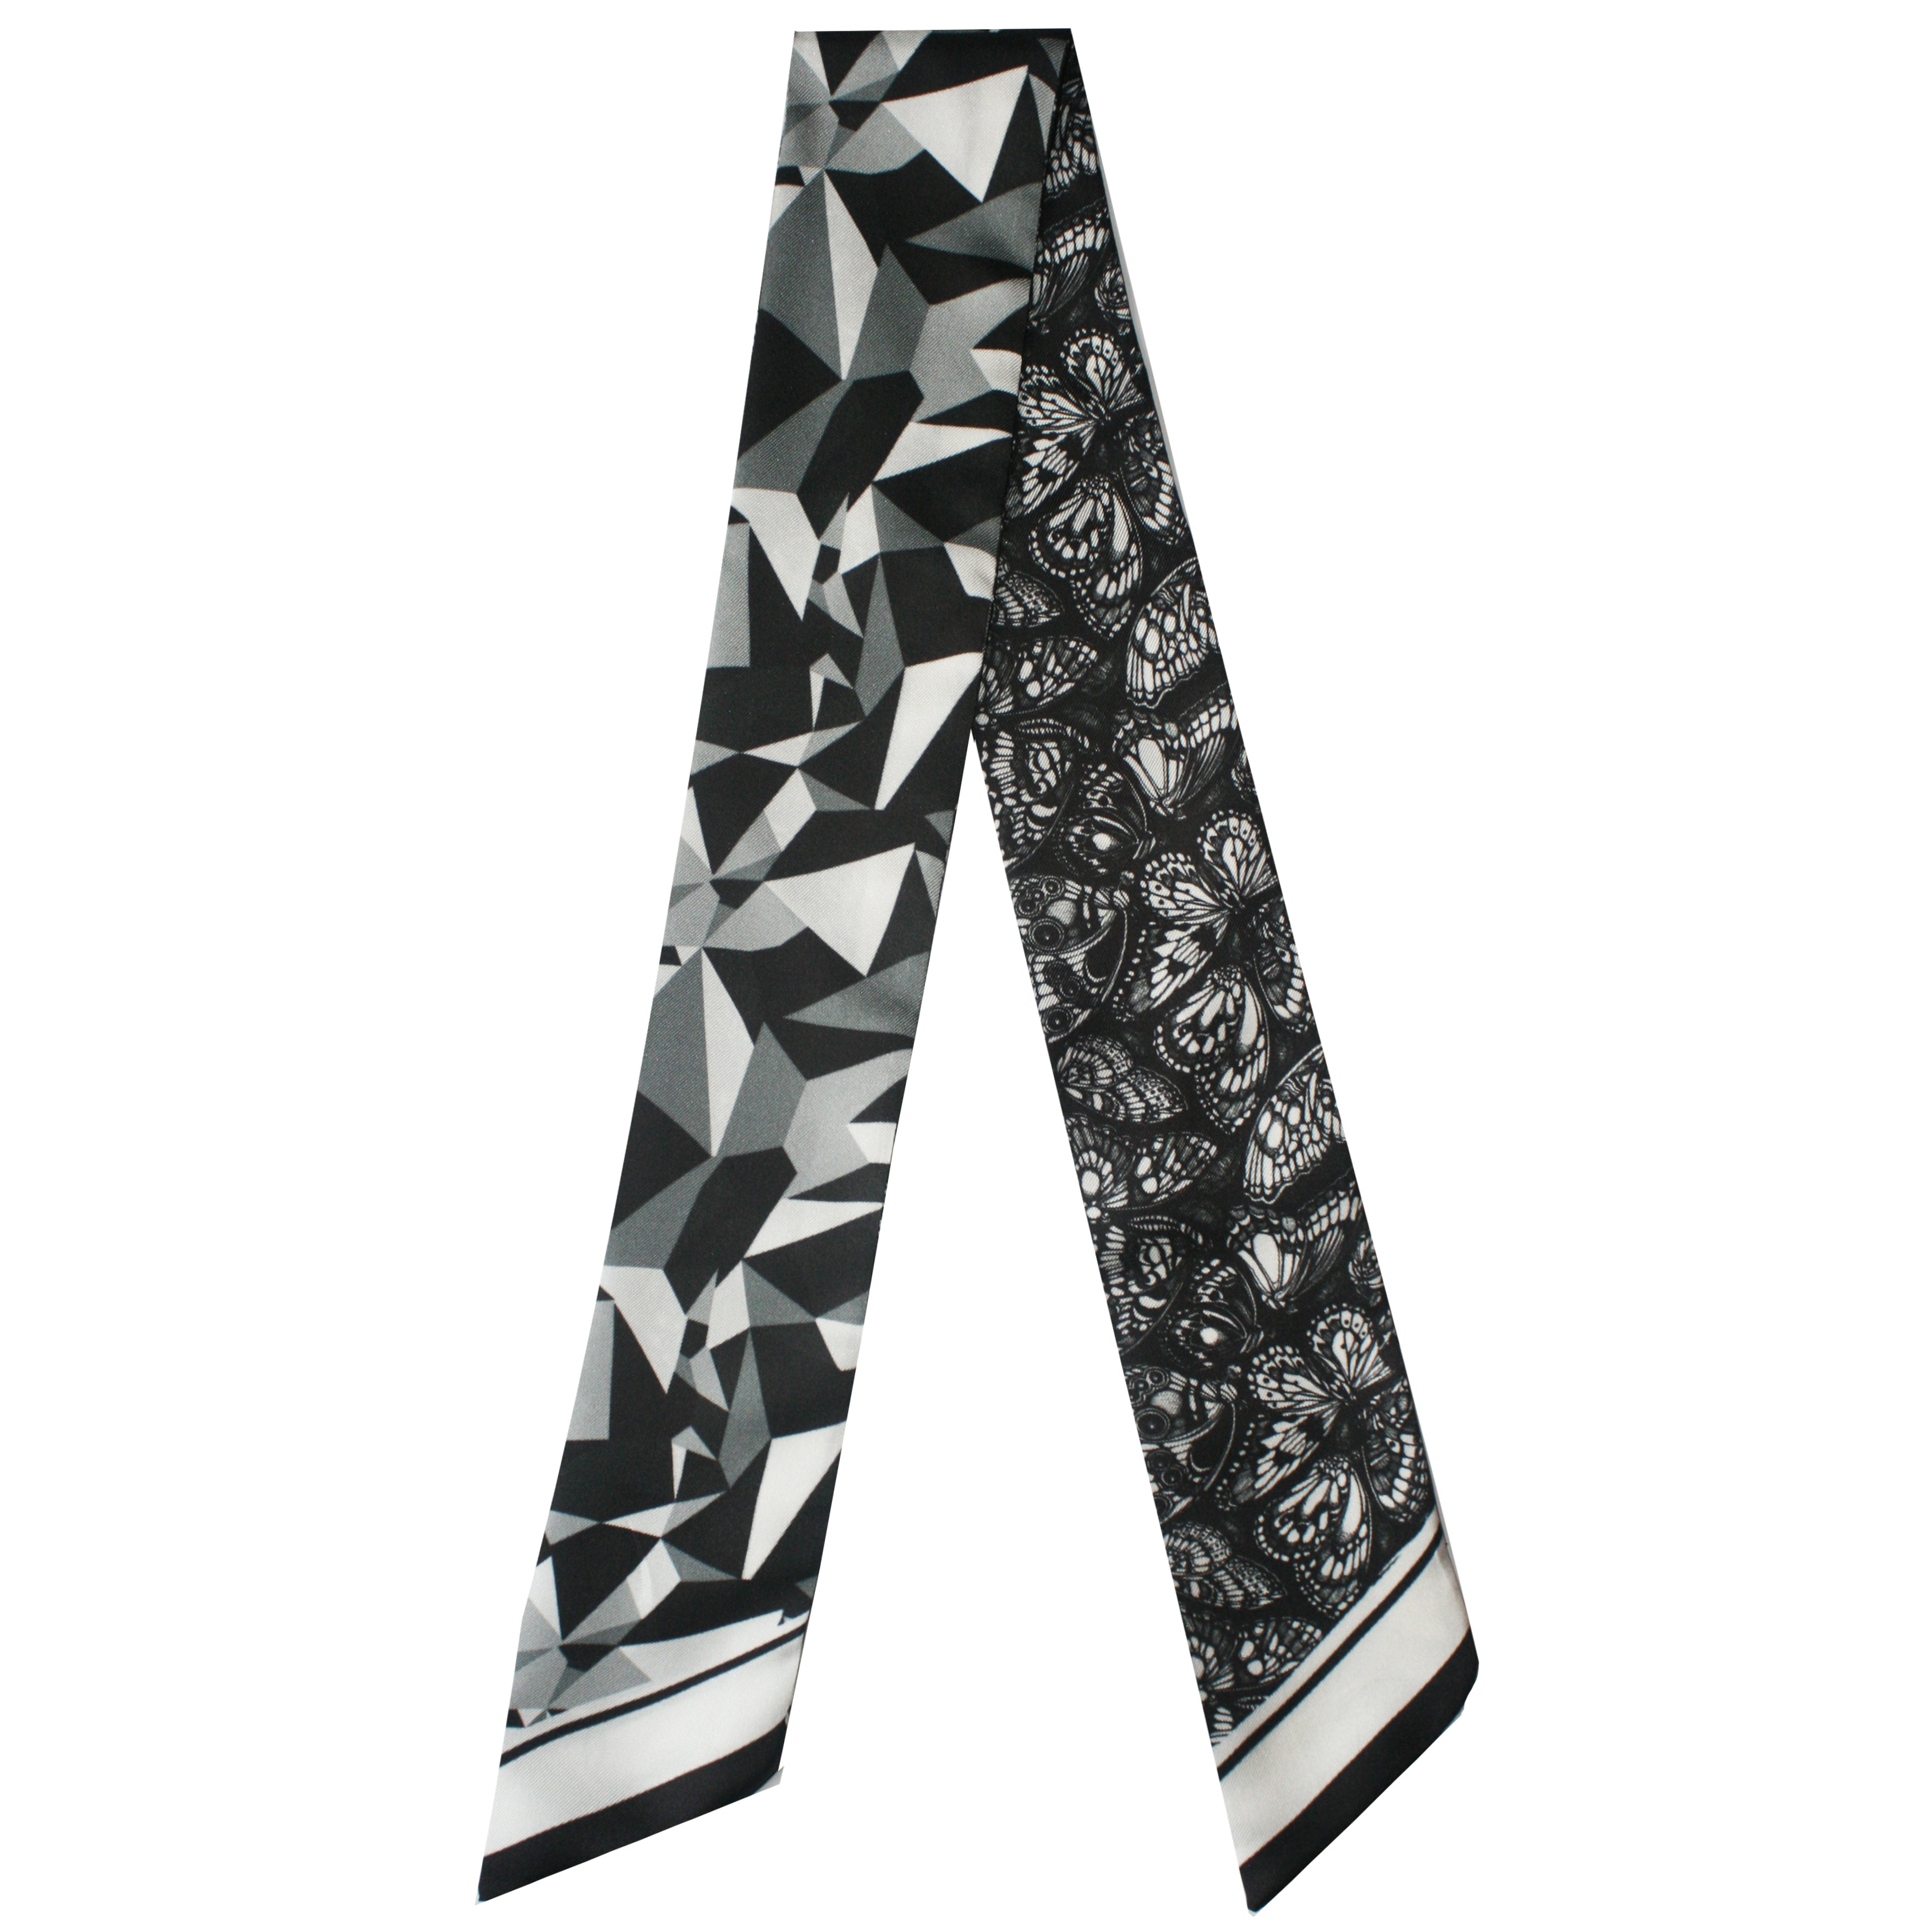 The Prism & Butterfly Twilly Scarf [Preorder]